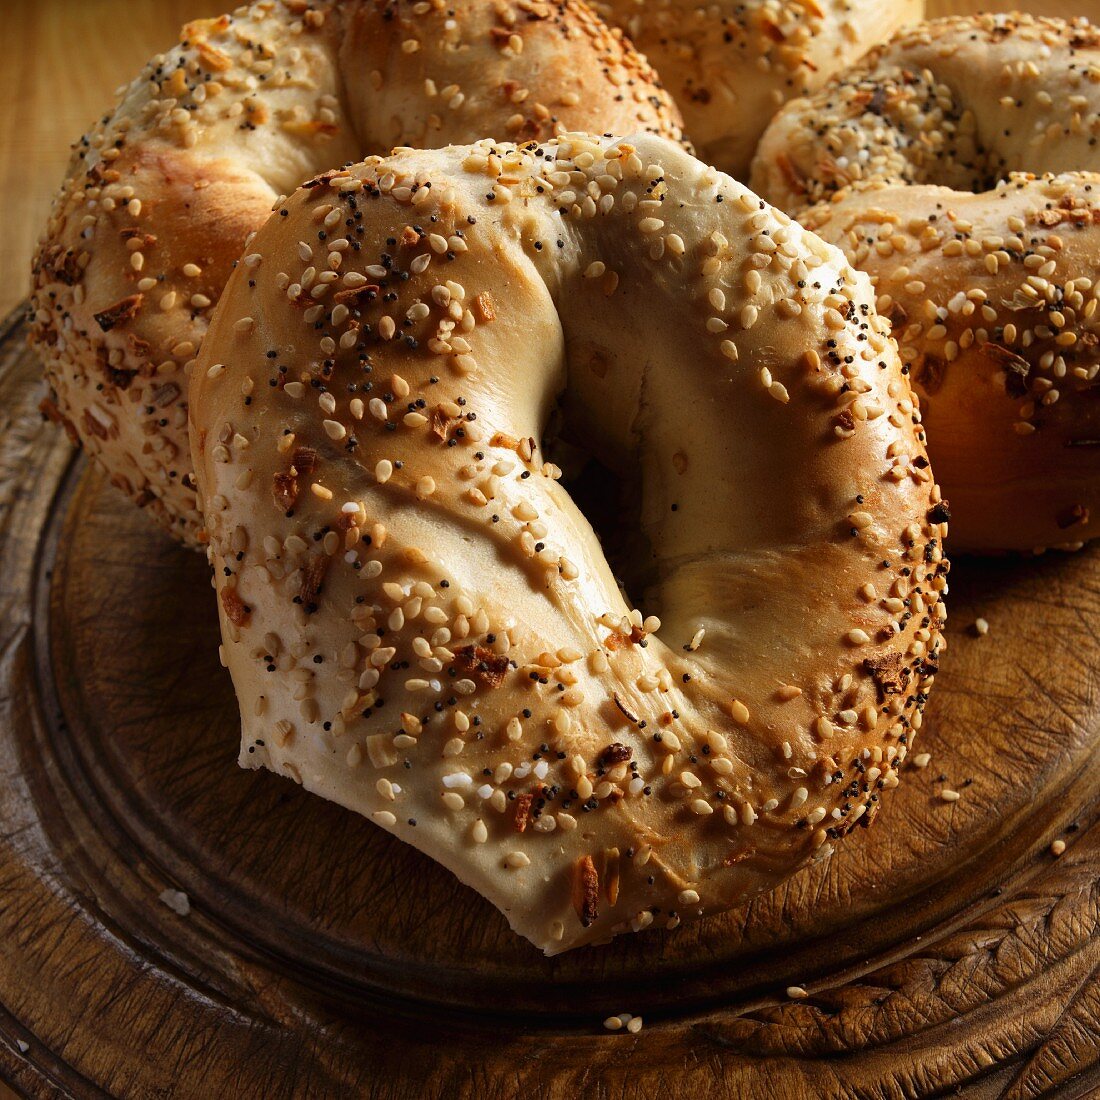 Whole Everything Bagels